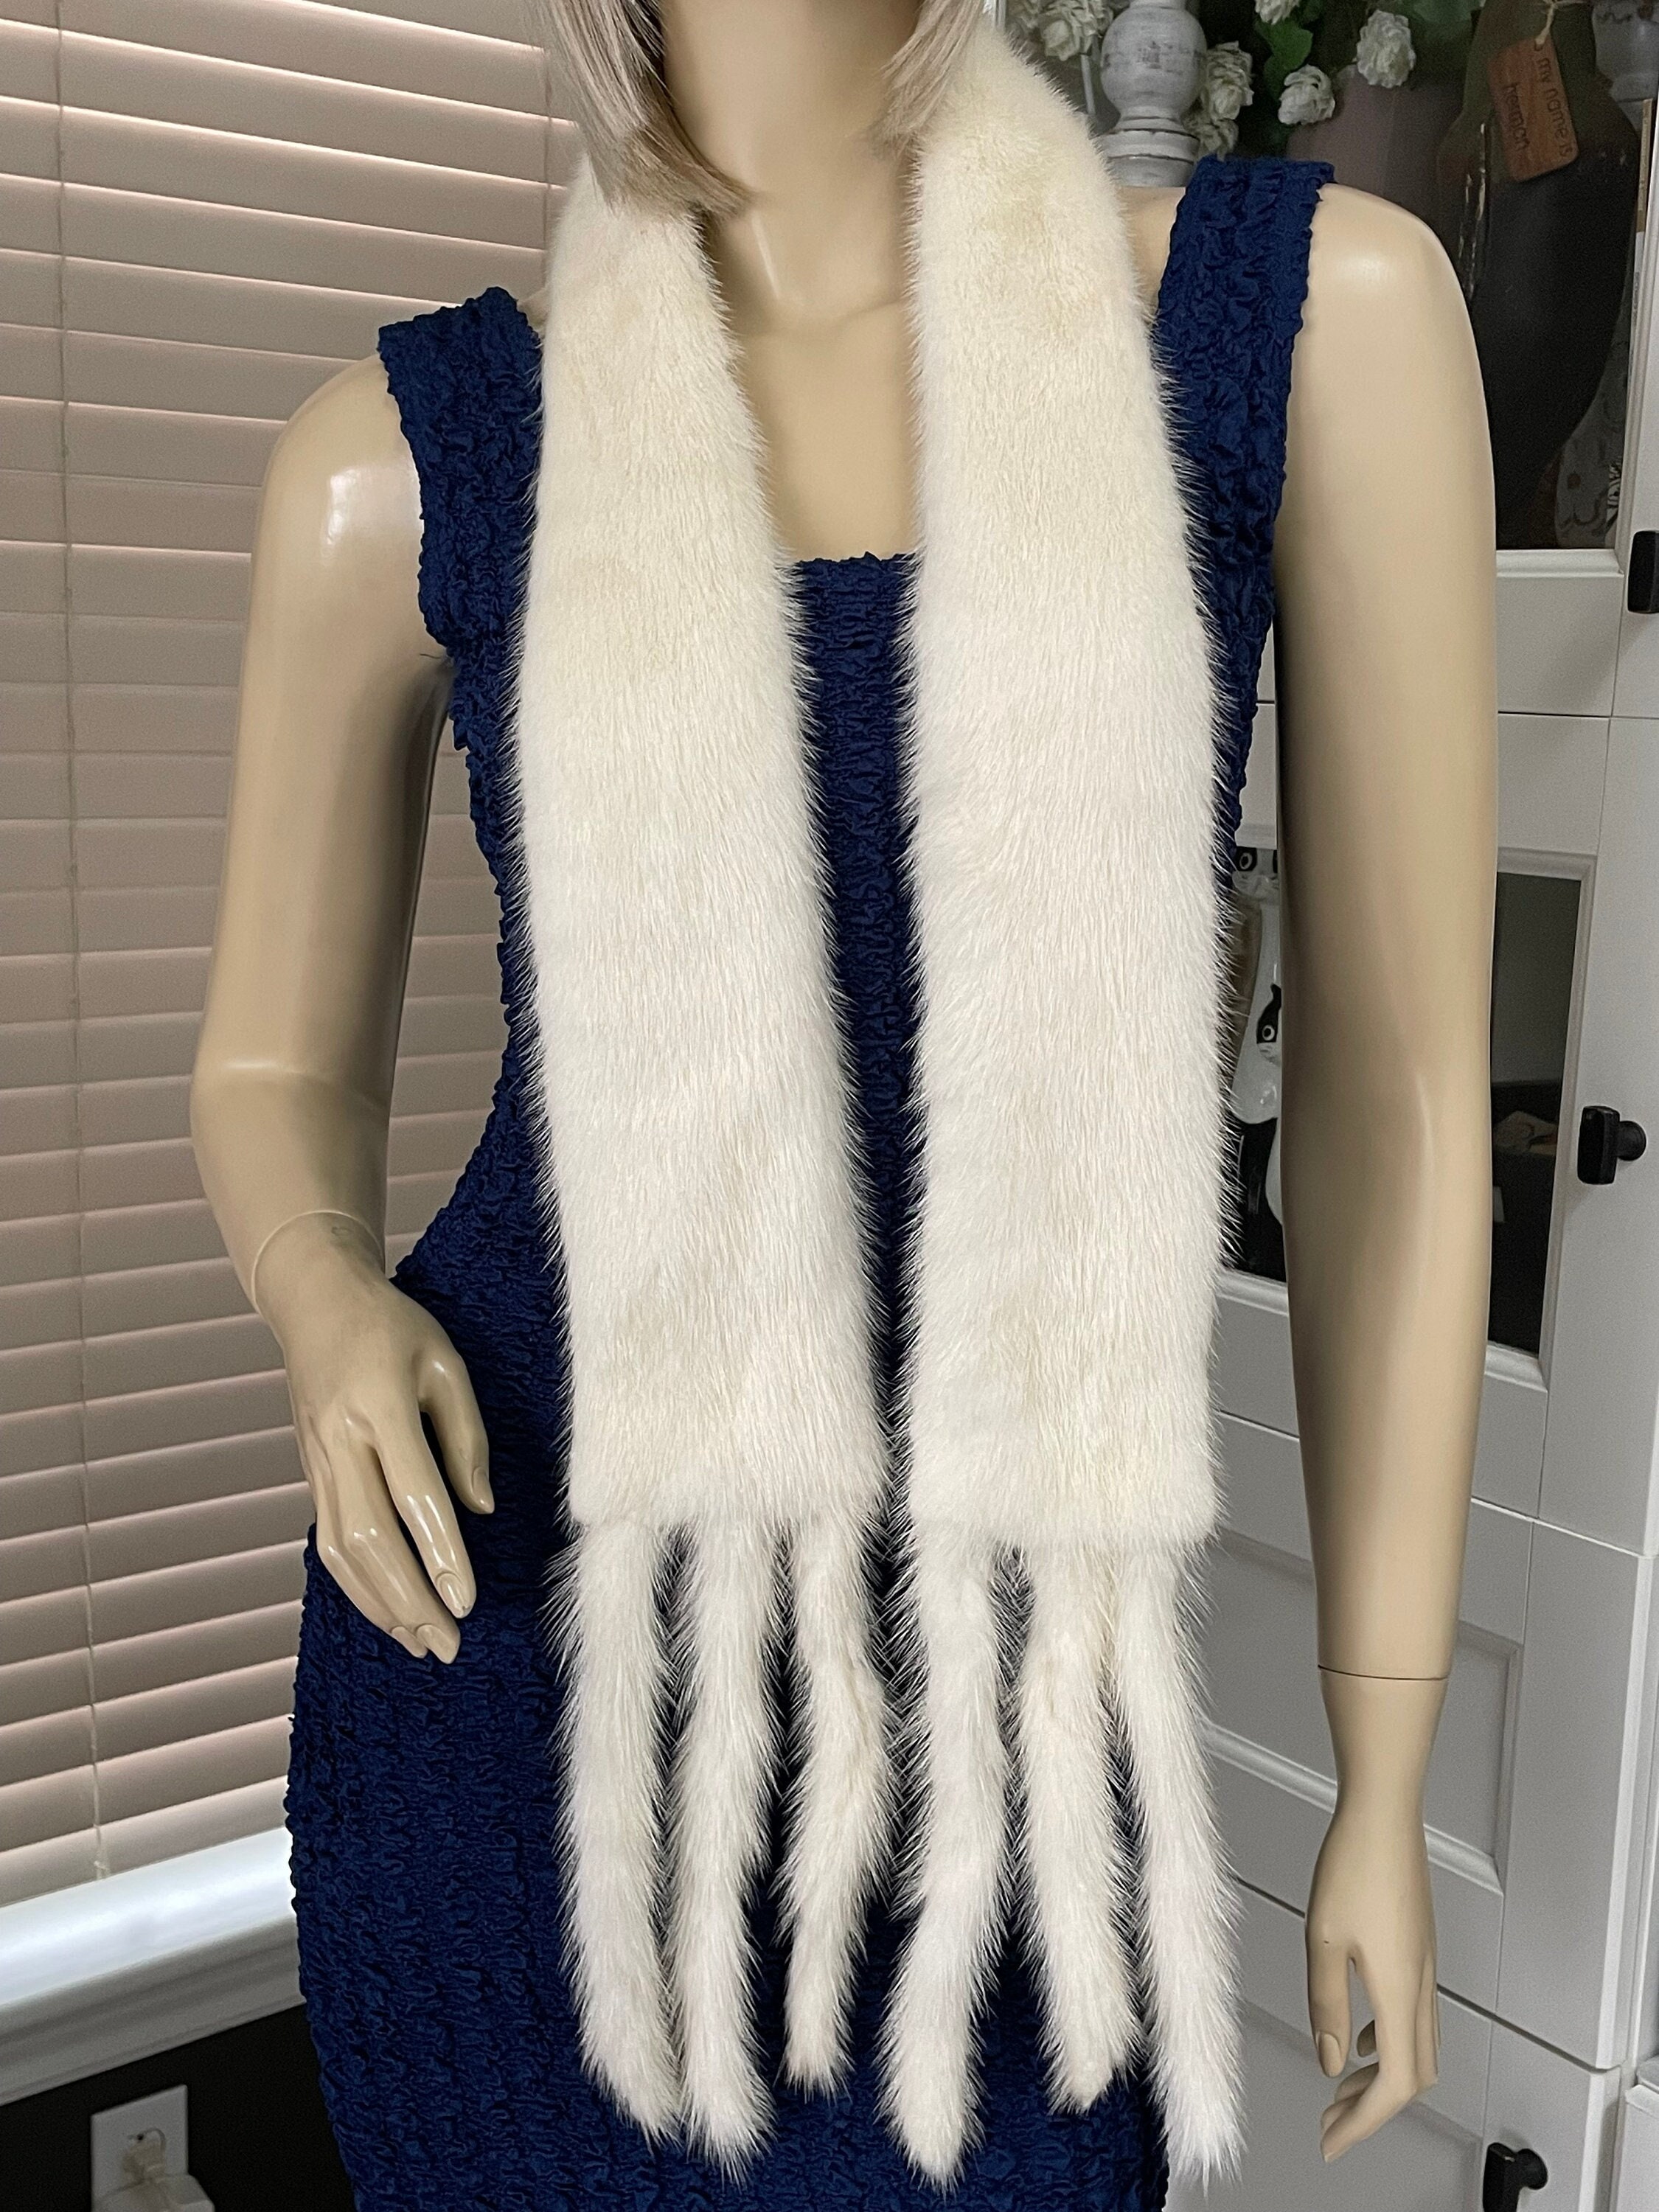 FRR Medium Natural Coyote Fur Boa Scarf with Leather Ties